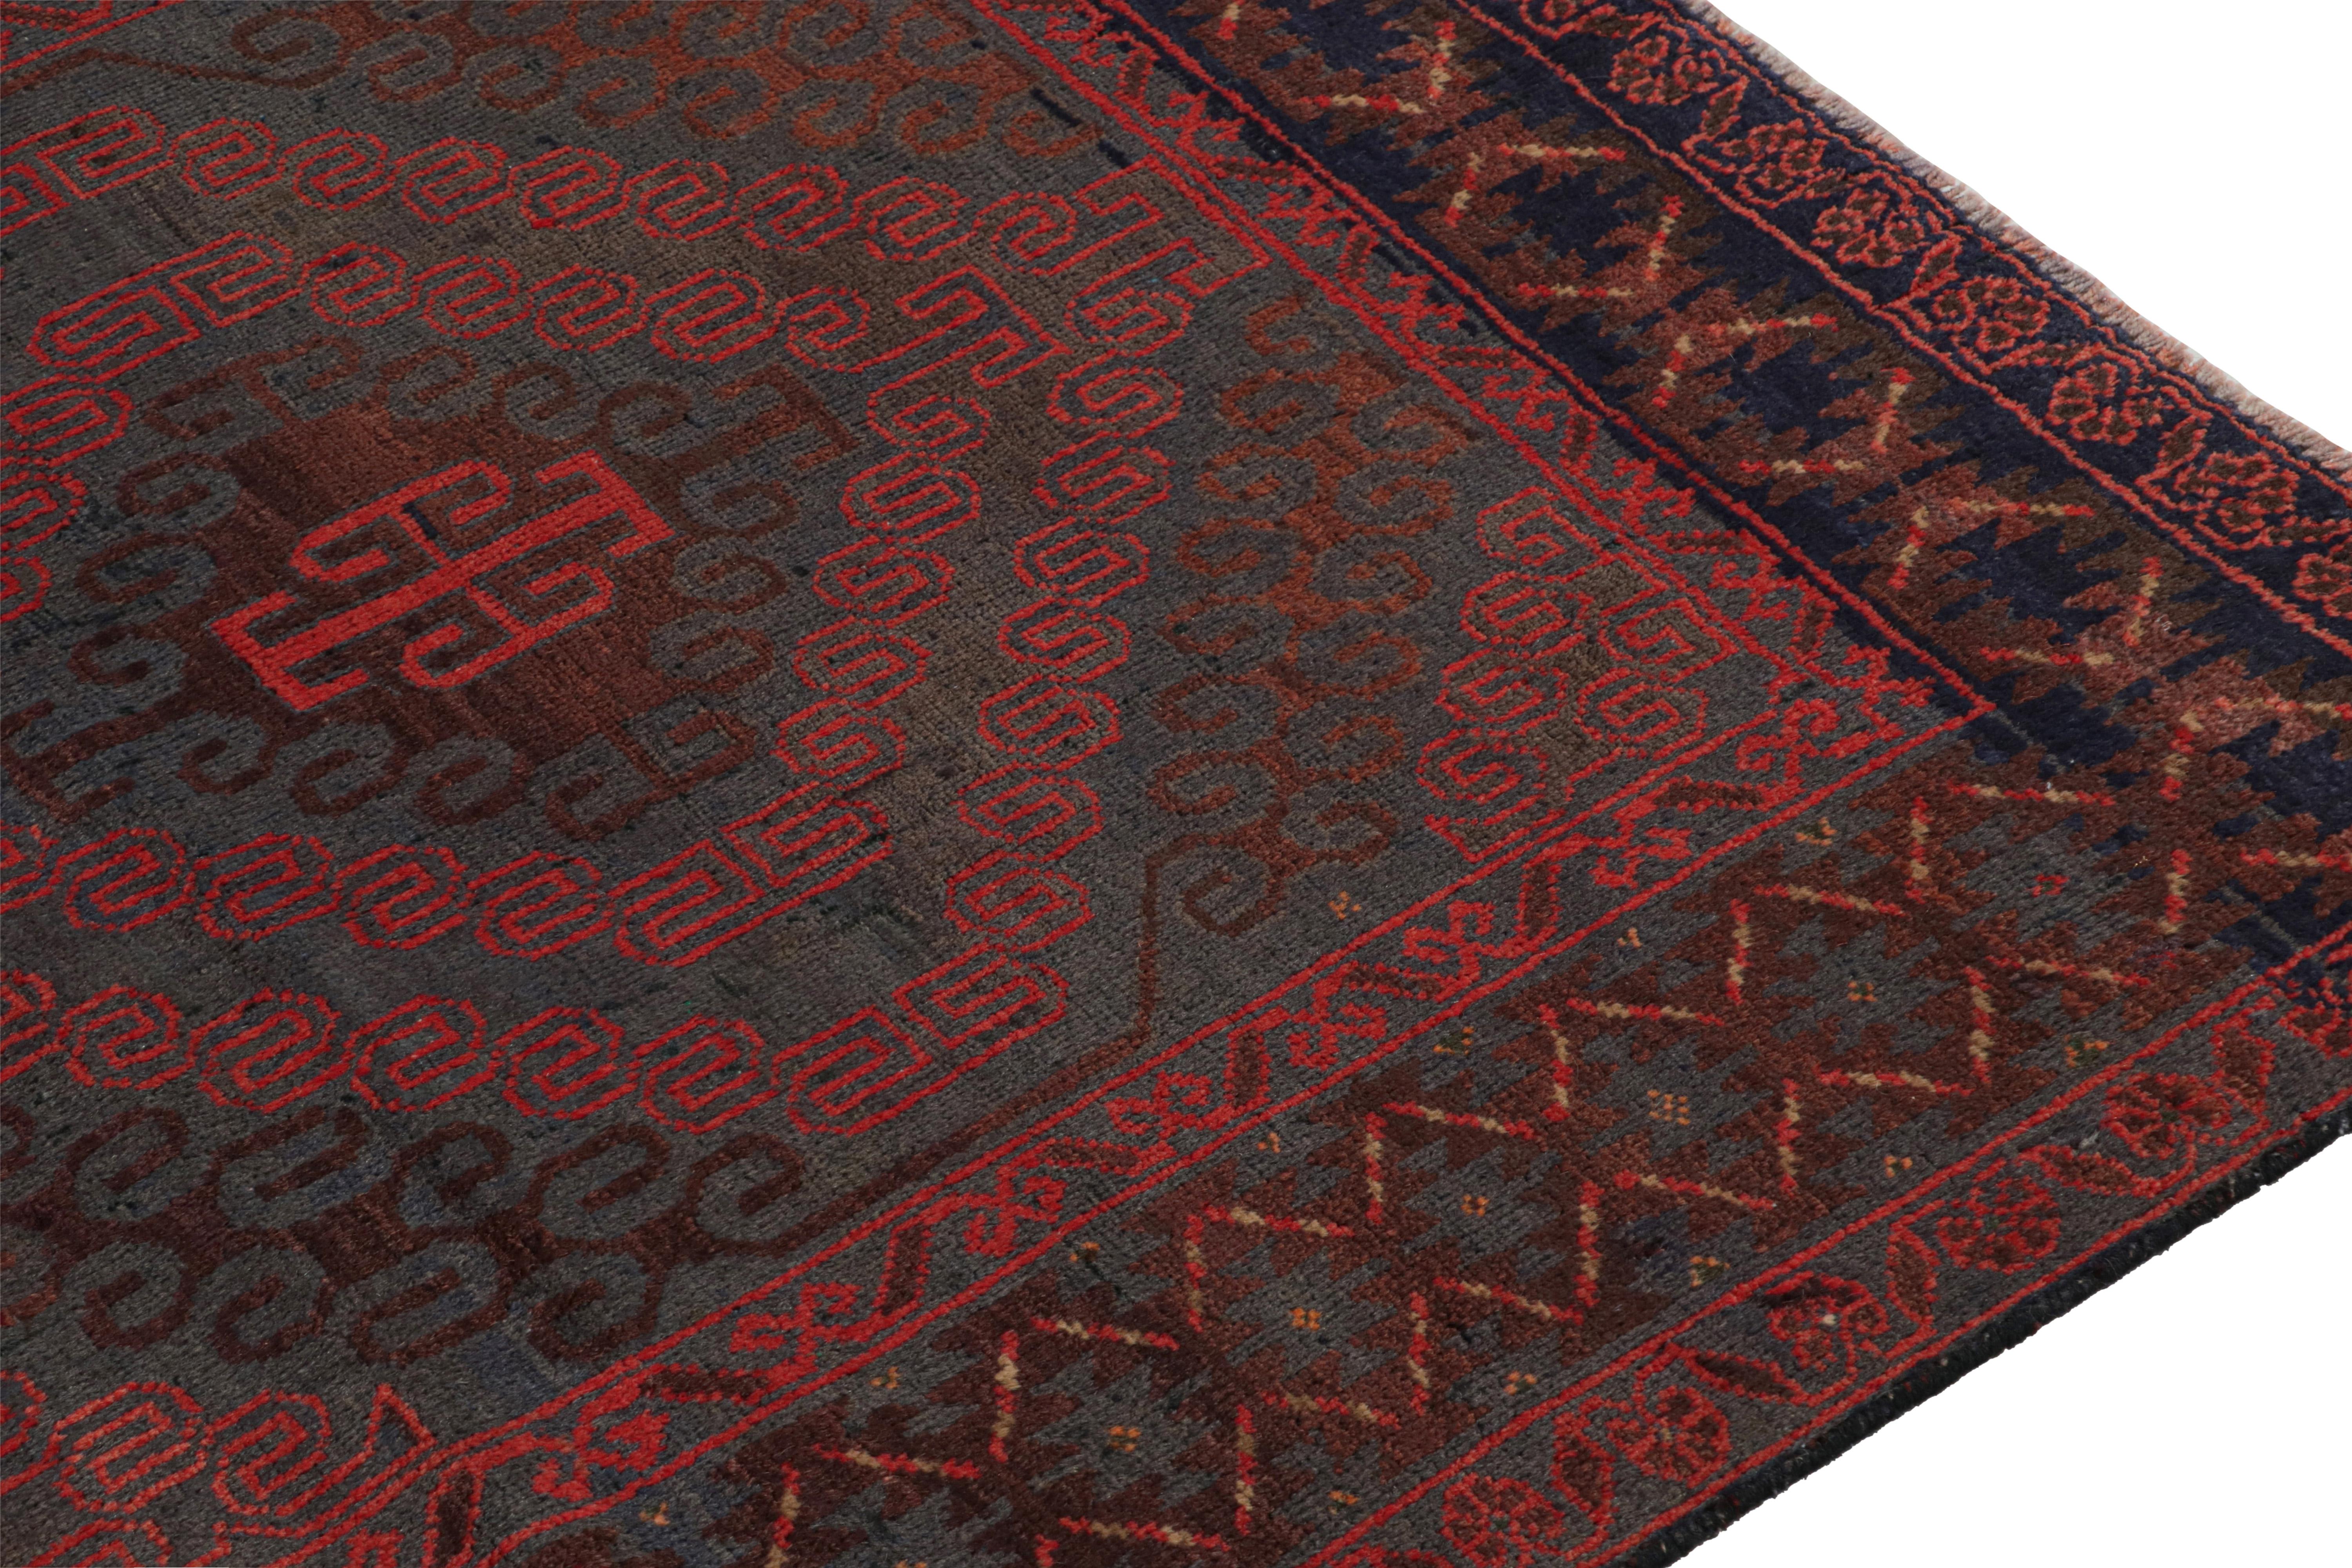 Vintage Baluch Tribal Rug in Red, Blue & Brown Patterns from Rug & Kilim In Good Condition For Sale In Long Island City, NY